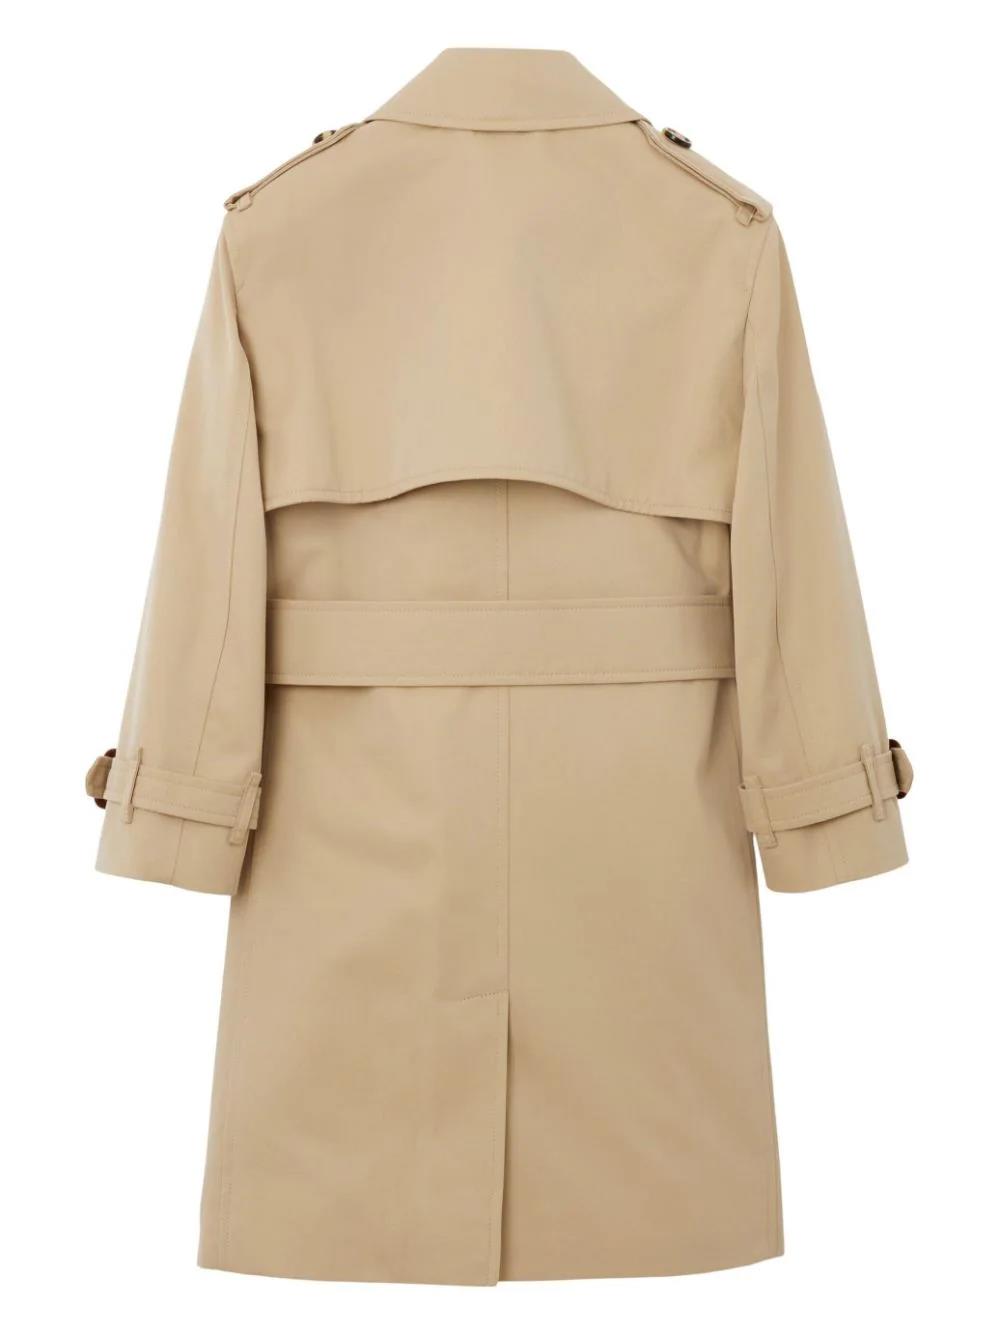 MAYFAIR beige cotton canvas girl BURBERRY trench coat